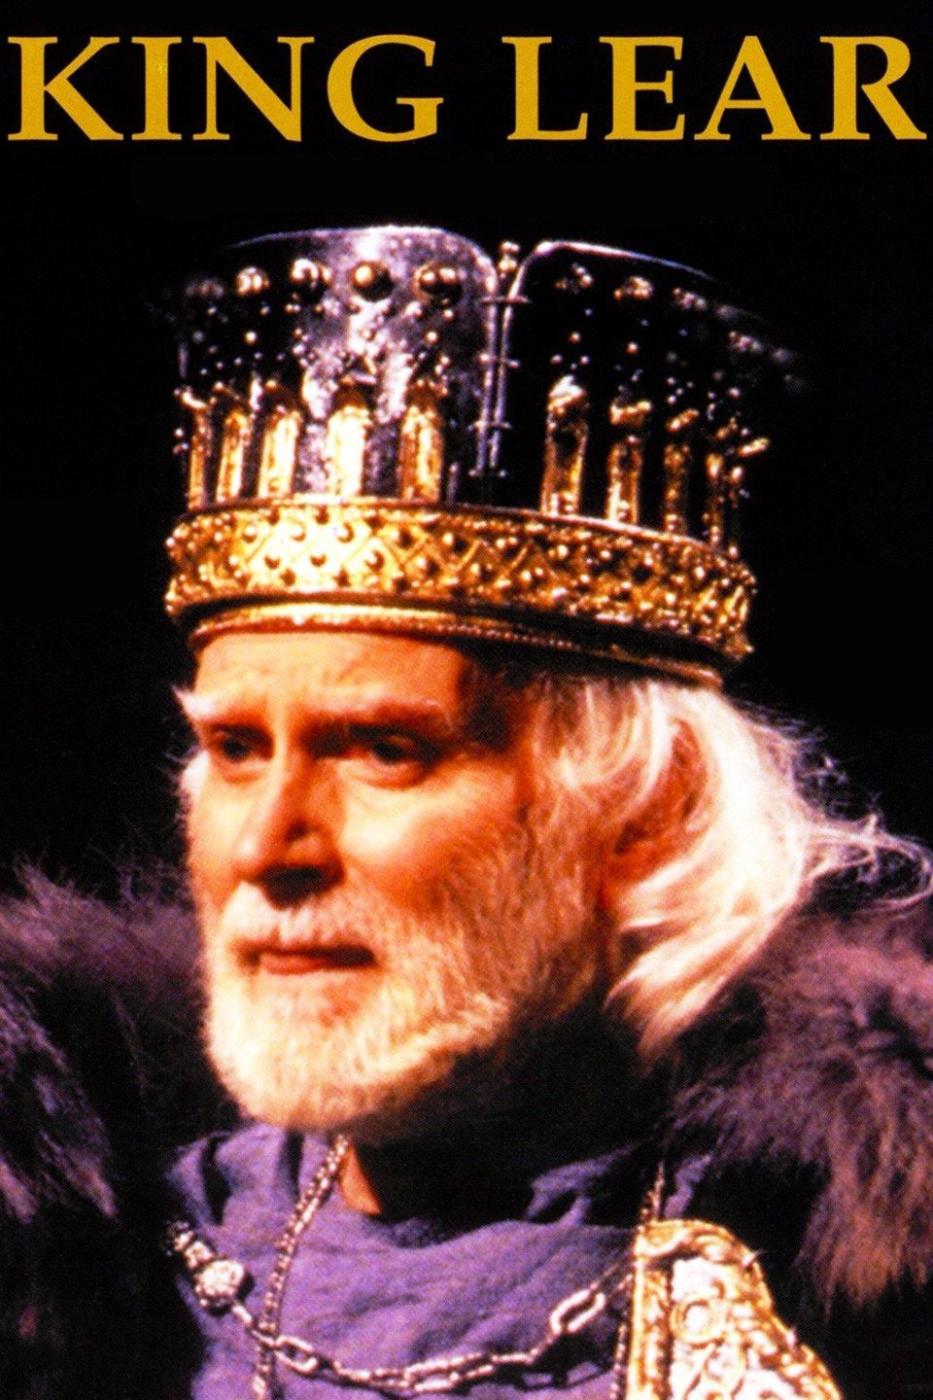 How Has King Lear Been Adapted For Film And Stage?